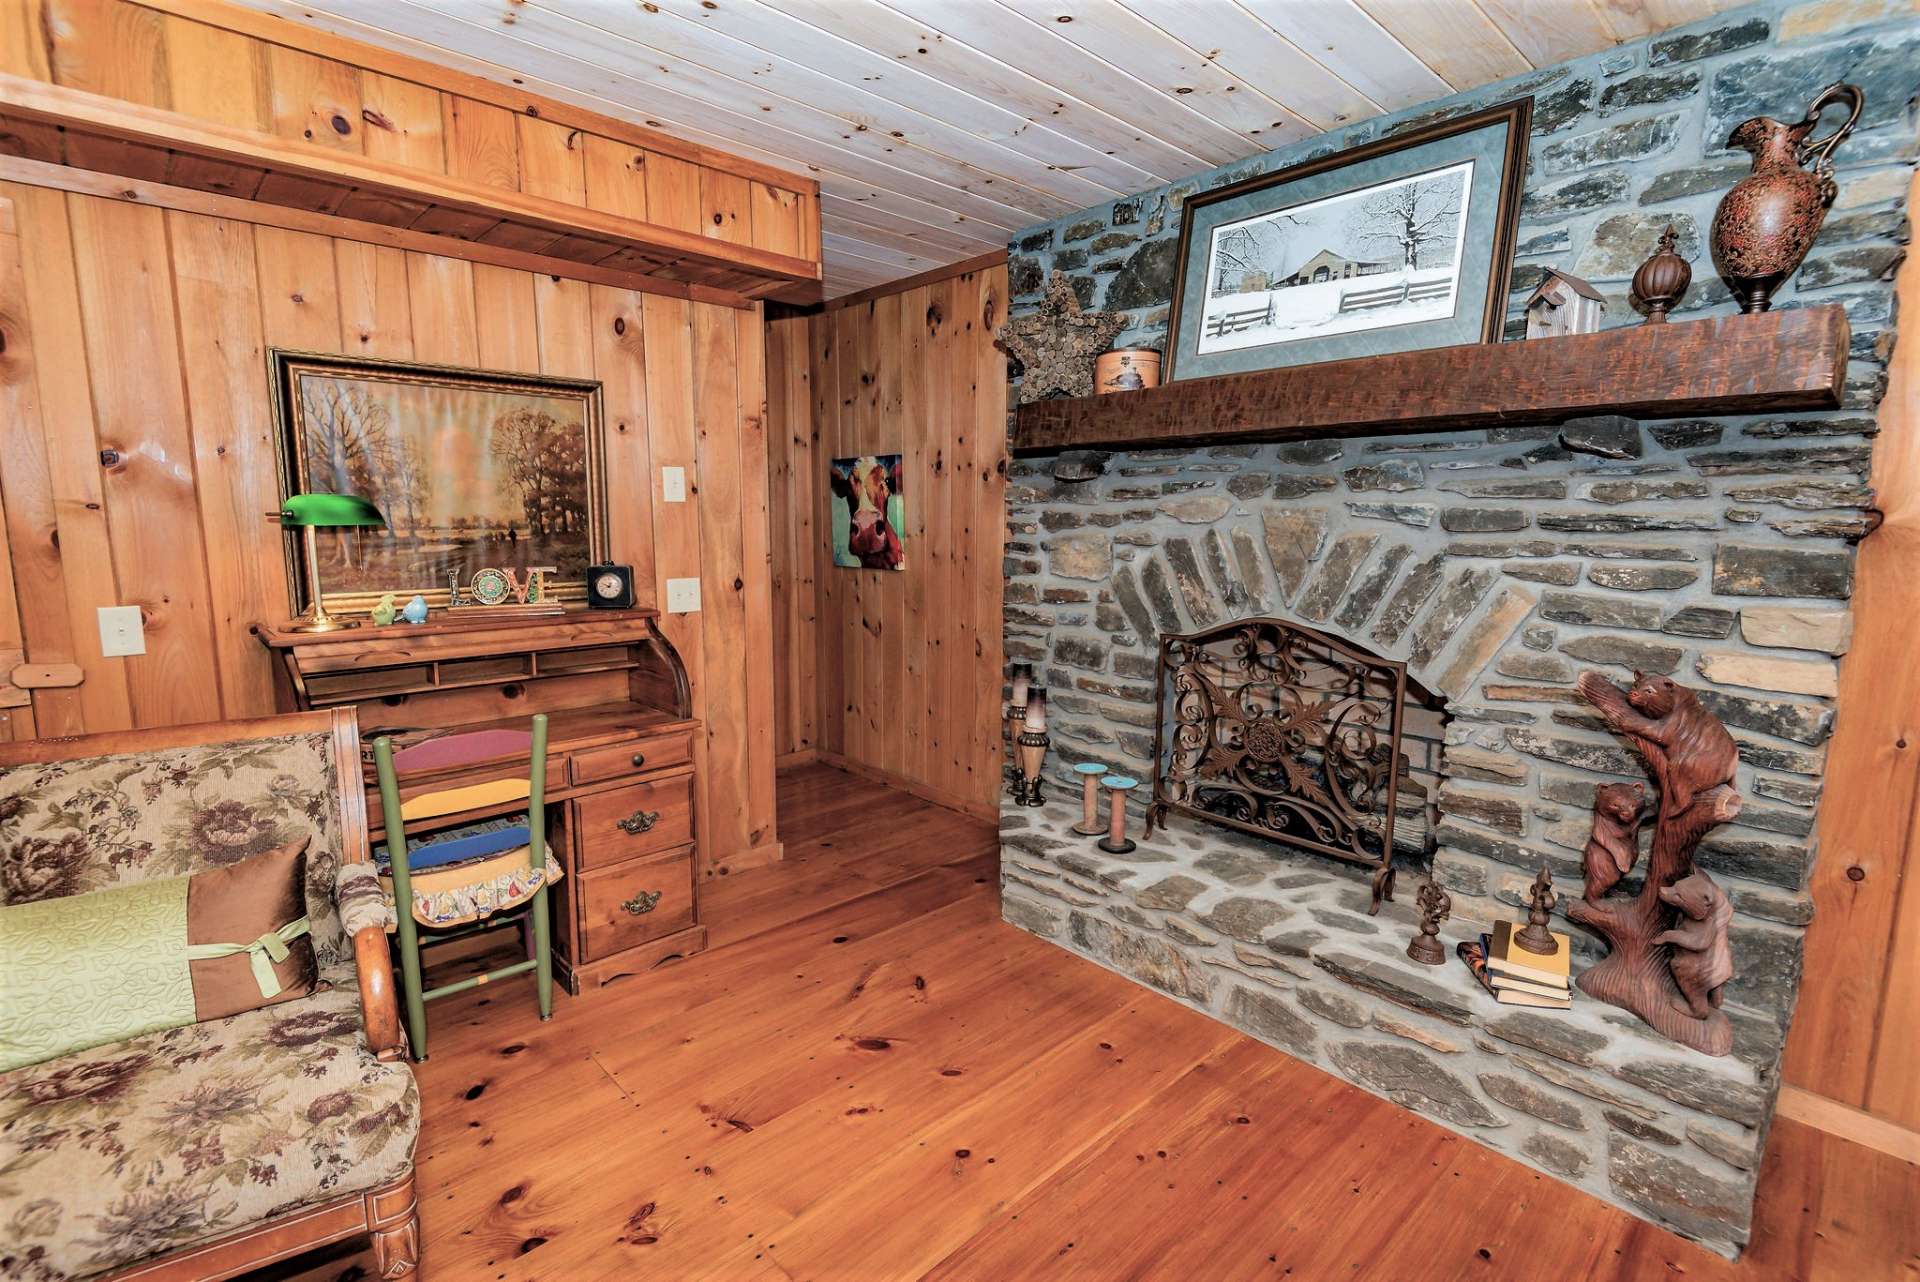 The second stone fireplace with gas logs is located on the lower level and enhances the log cabin feel while adding warmth on cool winter evenings.